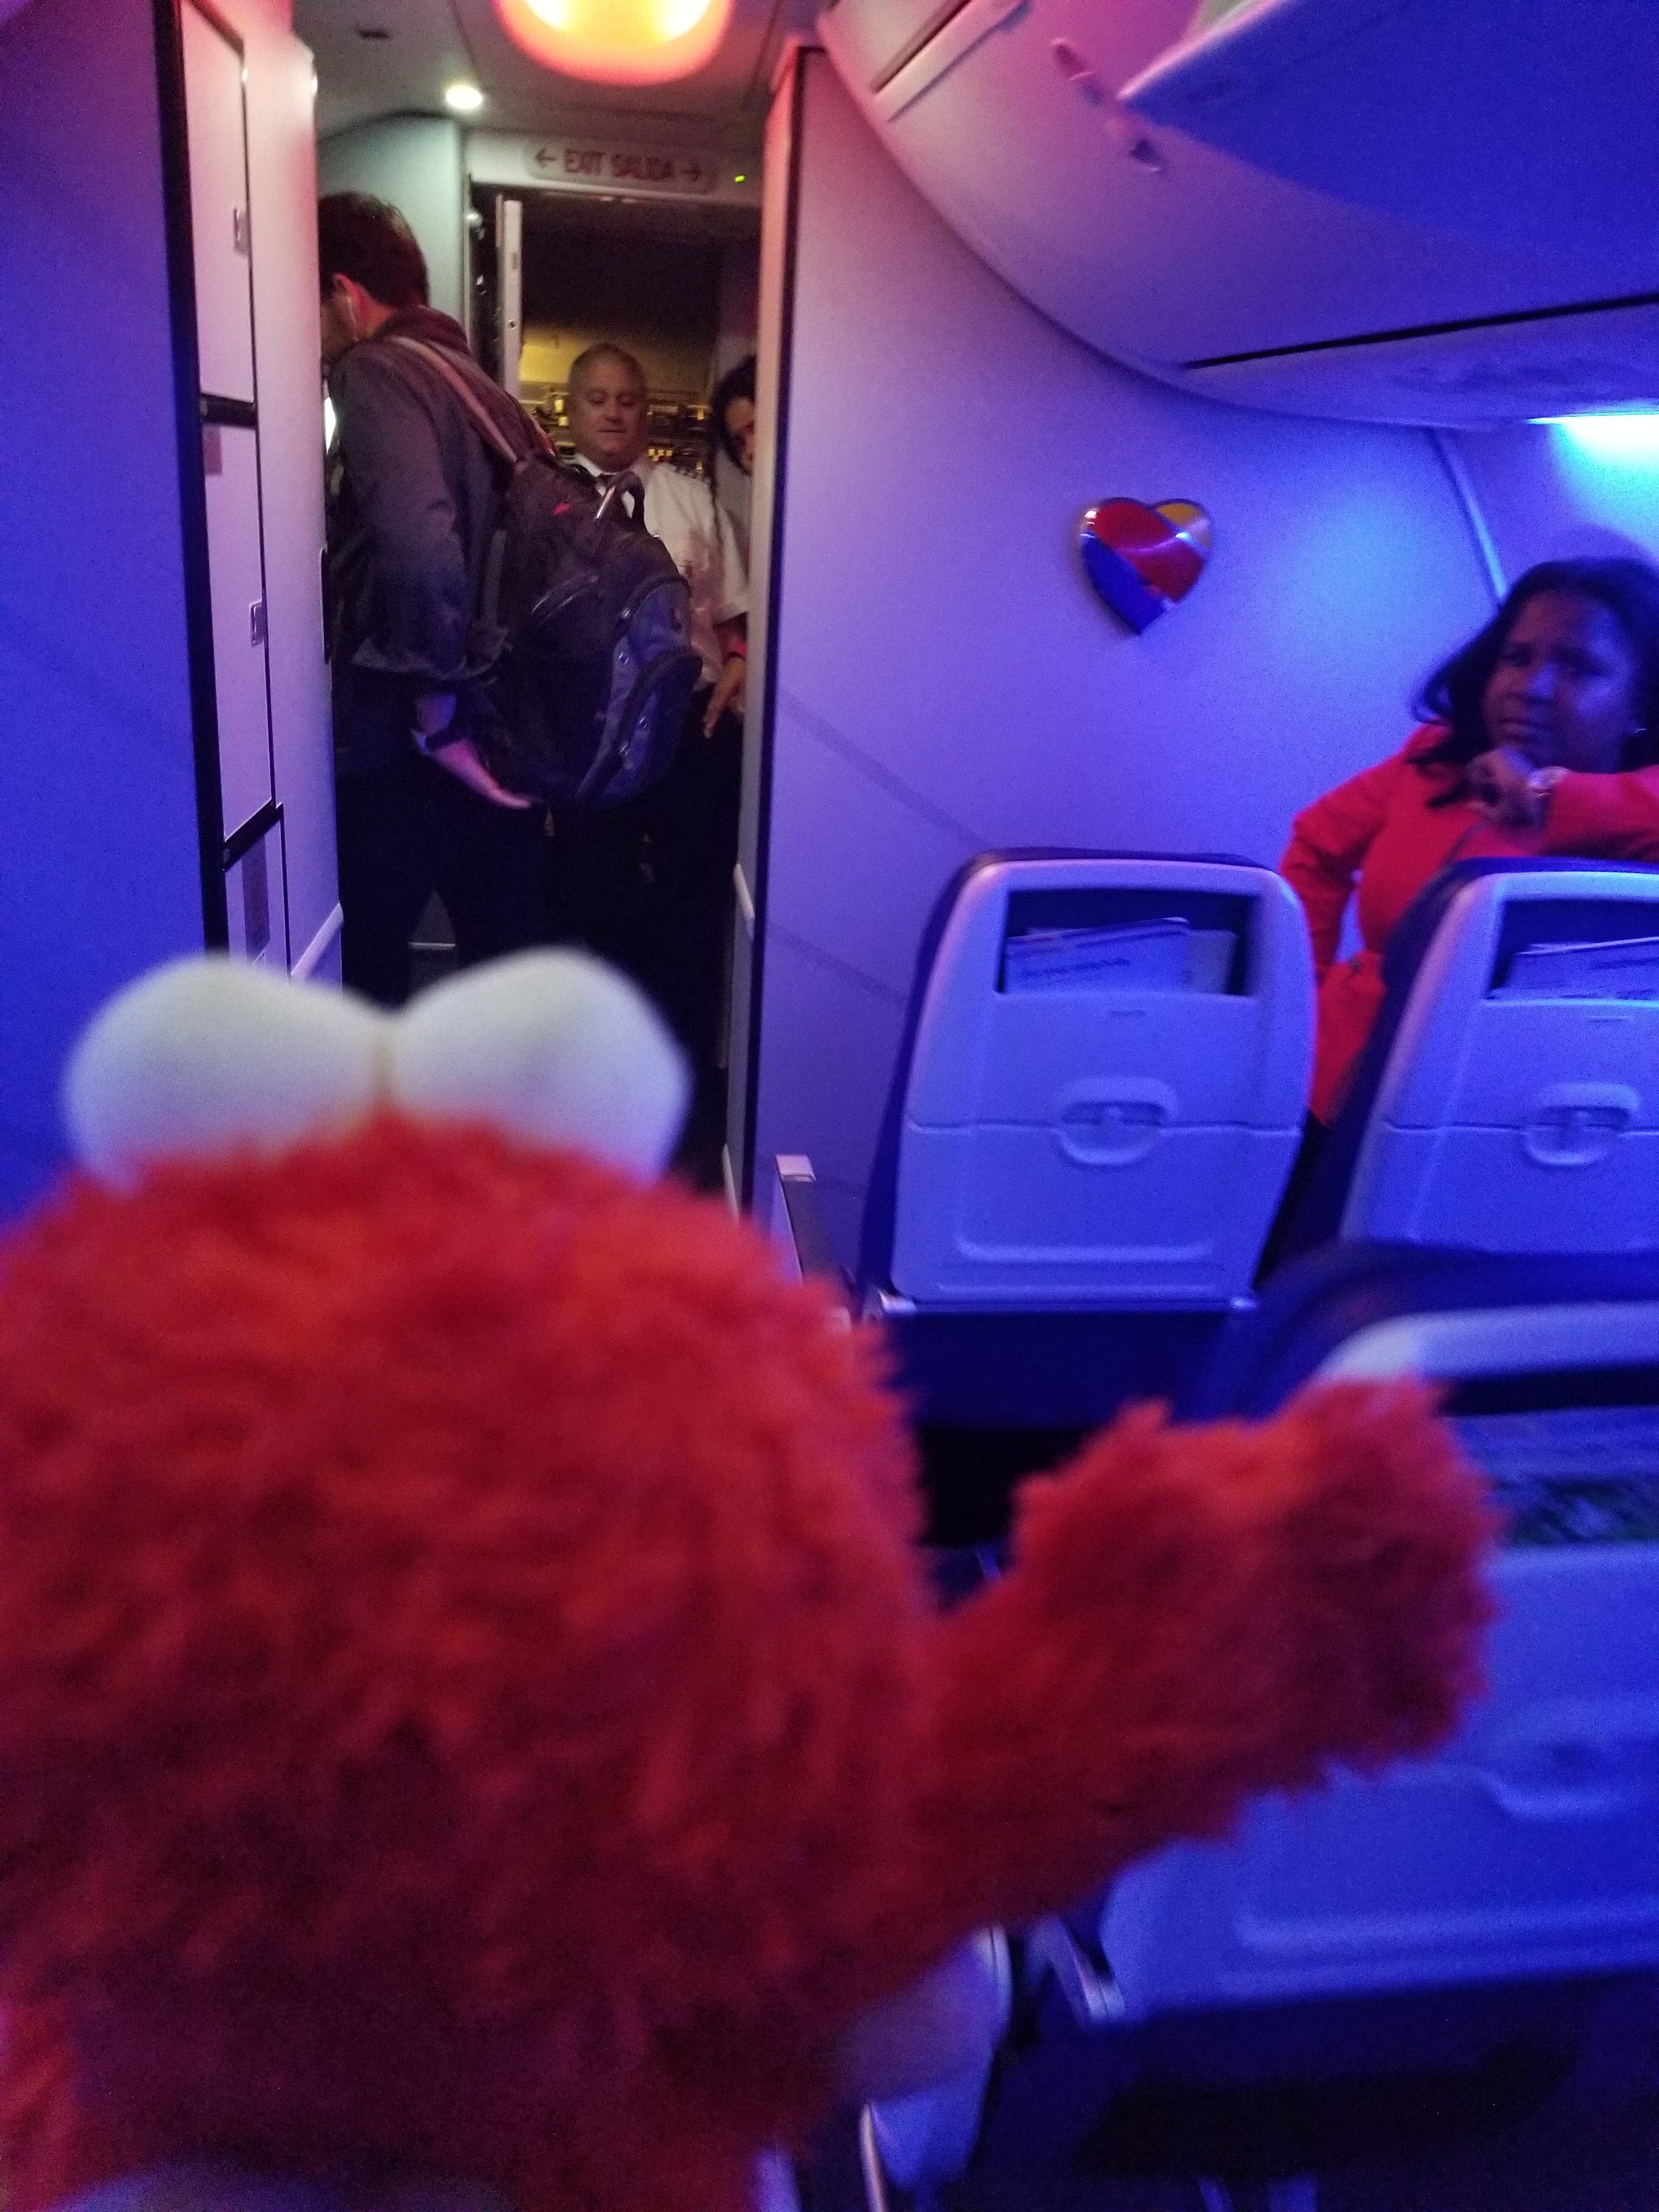 Elmo waves to the crew and thanks them for another safe flight